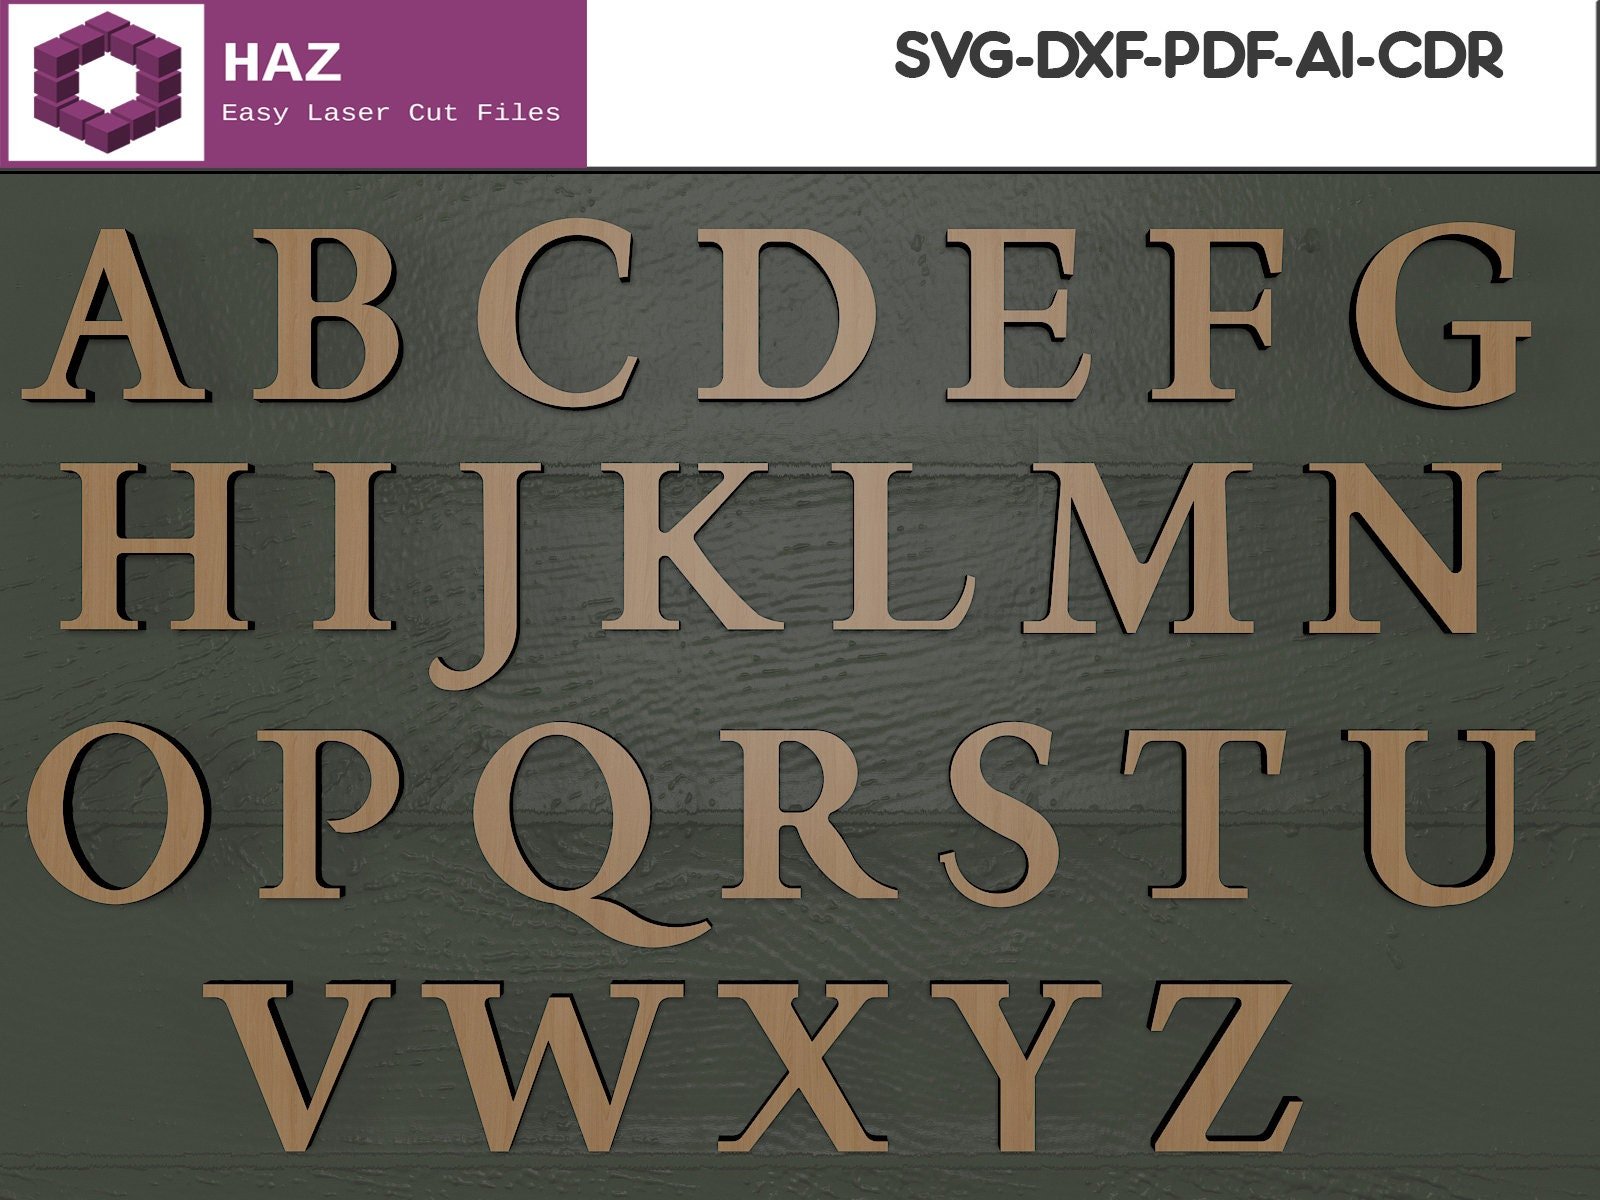 047 Initial Letter Cut Files / Wooden Uppercase Fonts / Alphabet Cutting Plans SVG DXF CDR Ai 047